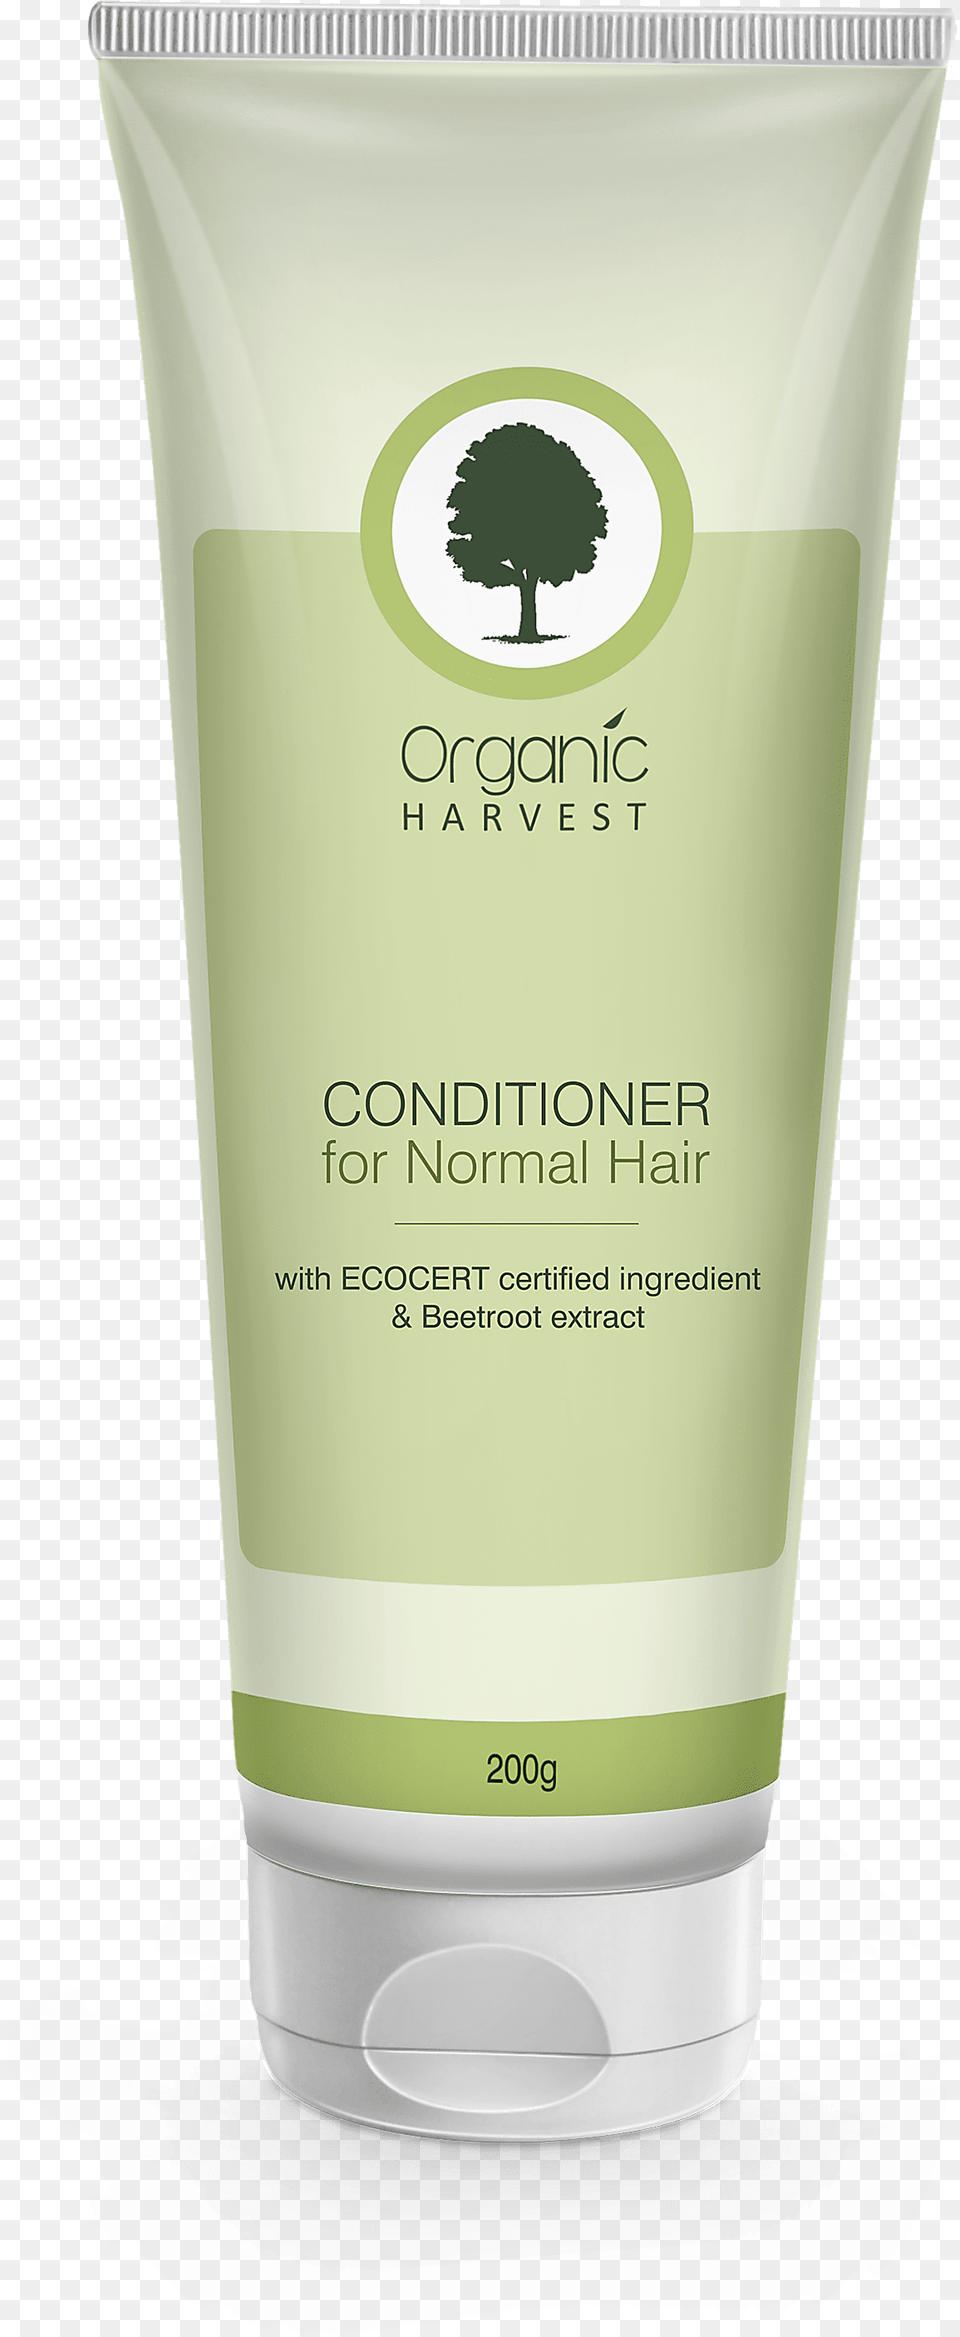 Conditioner For Normal Hair Available At Craftsvilla Organic Harvest, Bottle, Lotion, Cosmetics, Sunscreen Png